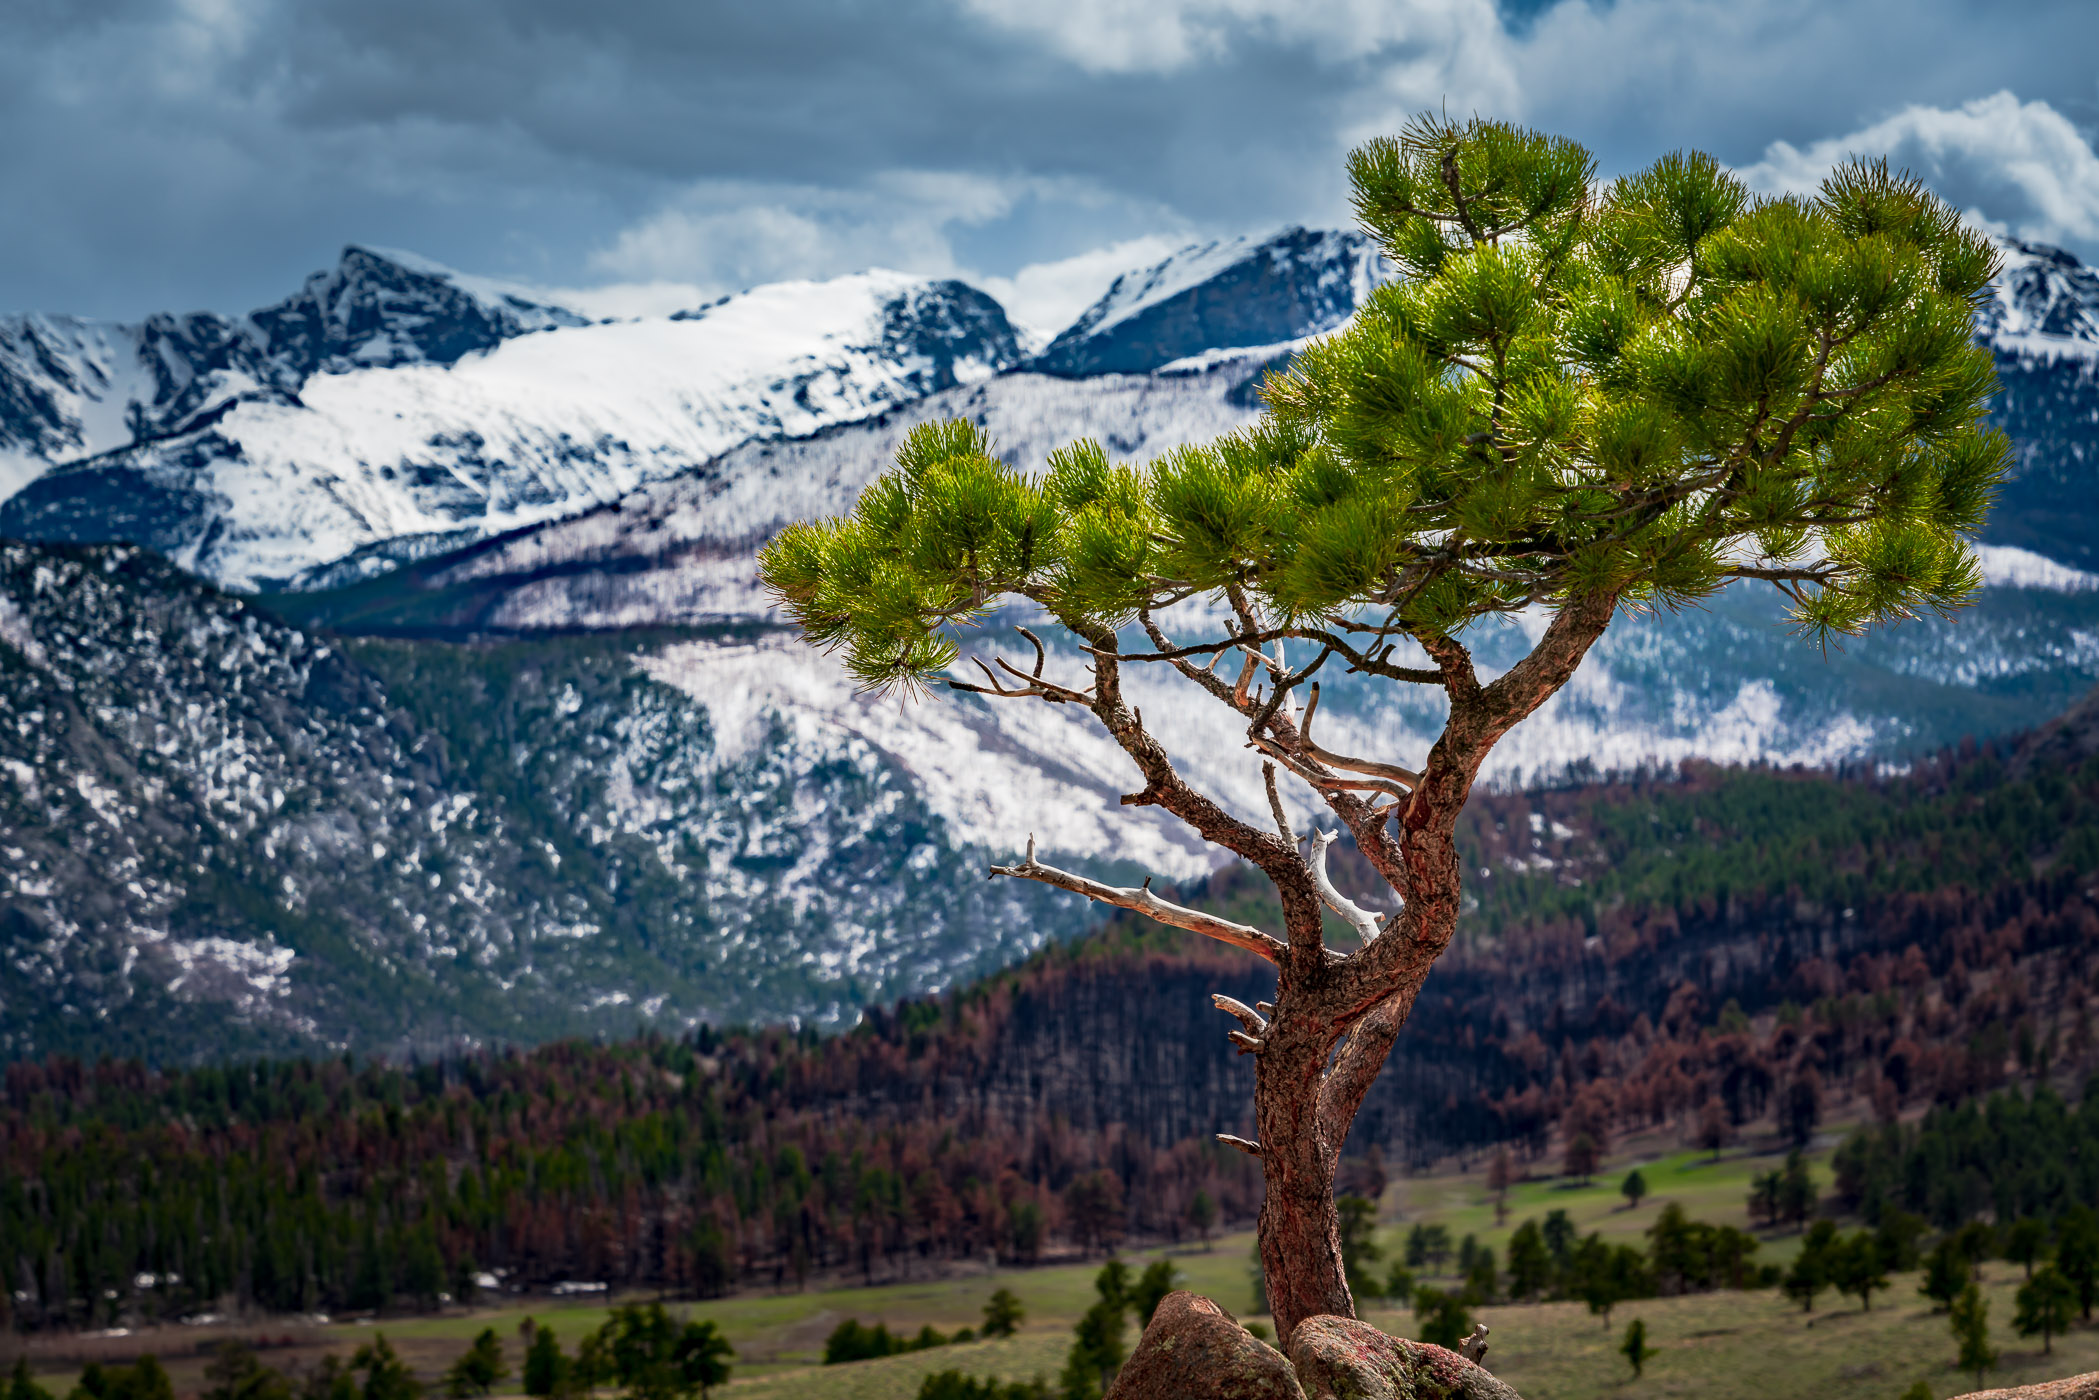 A lodgepole pine tree grows on a mountainside in Colorado's Rocky Mountain National Park.